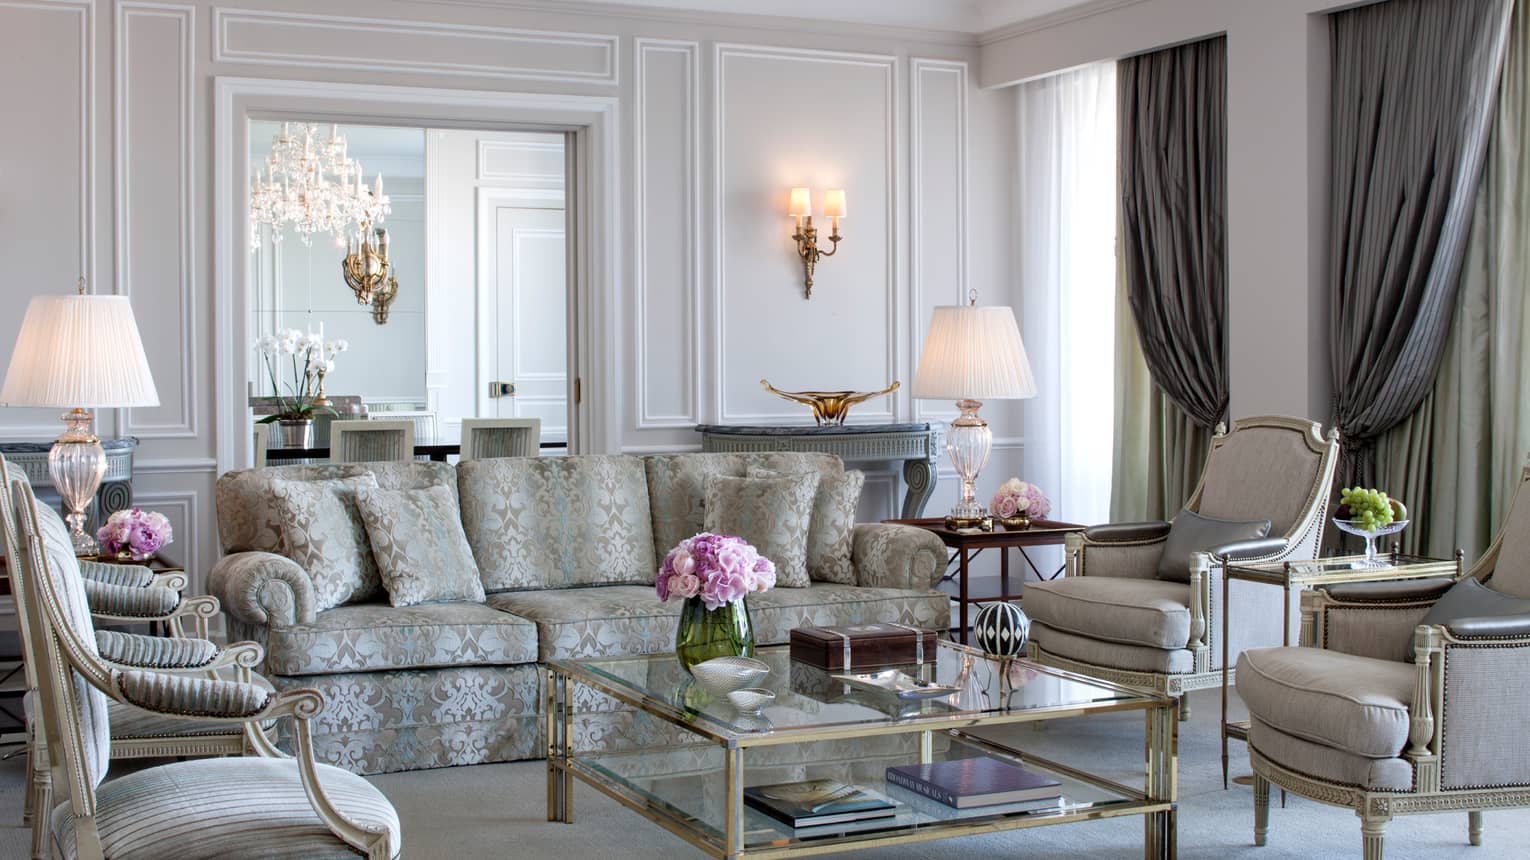 Royal Suite bright, elegant living room with blue-and-grey satin sofa, armchairs, glass coffee table with gold trim, white walls